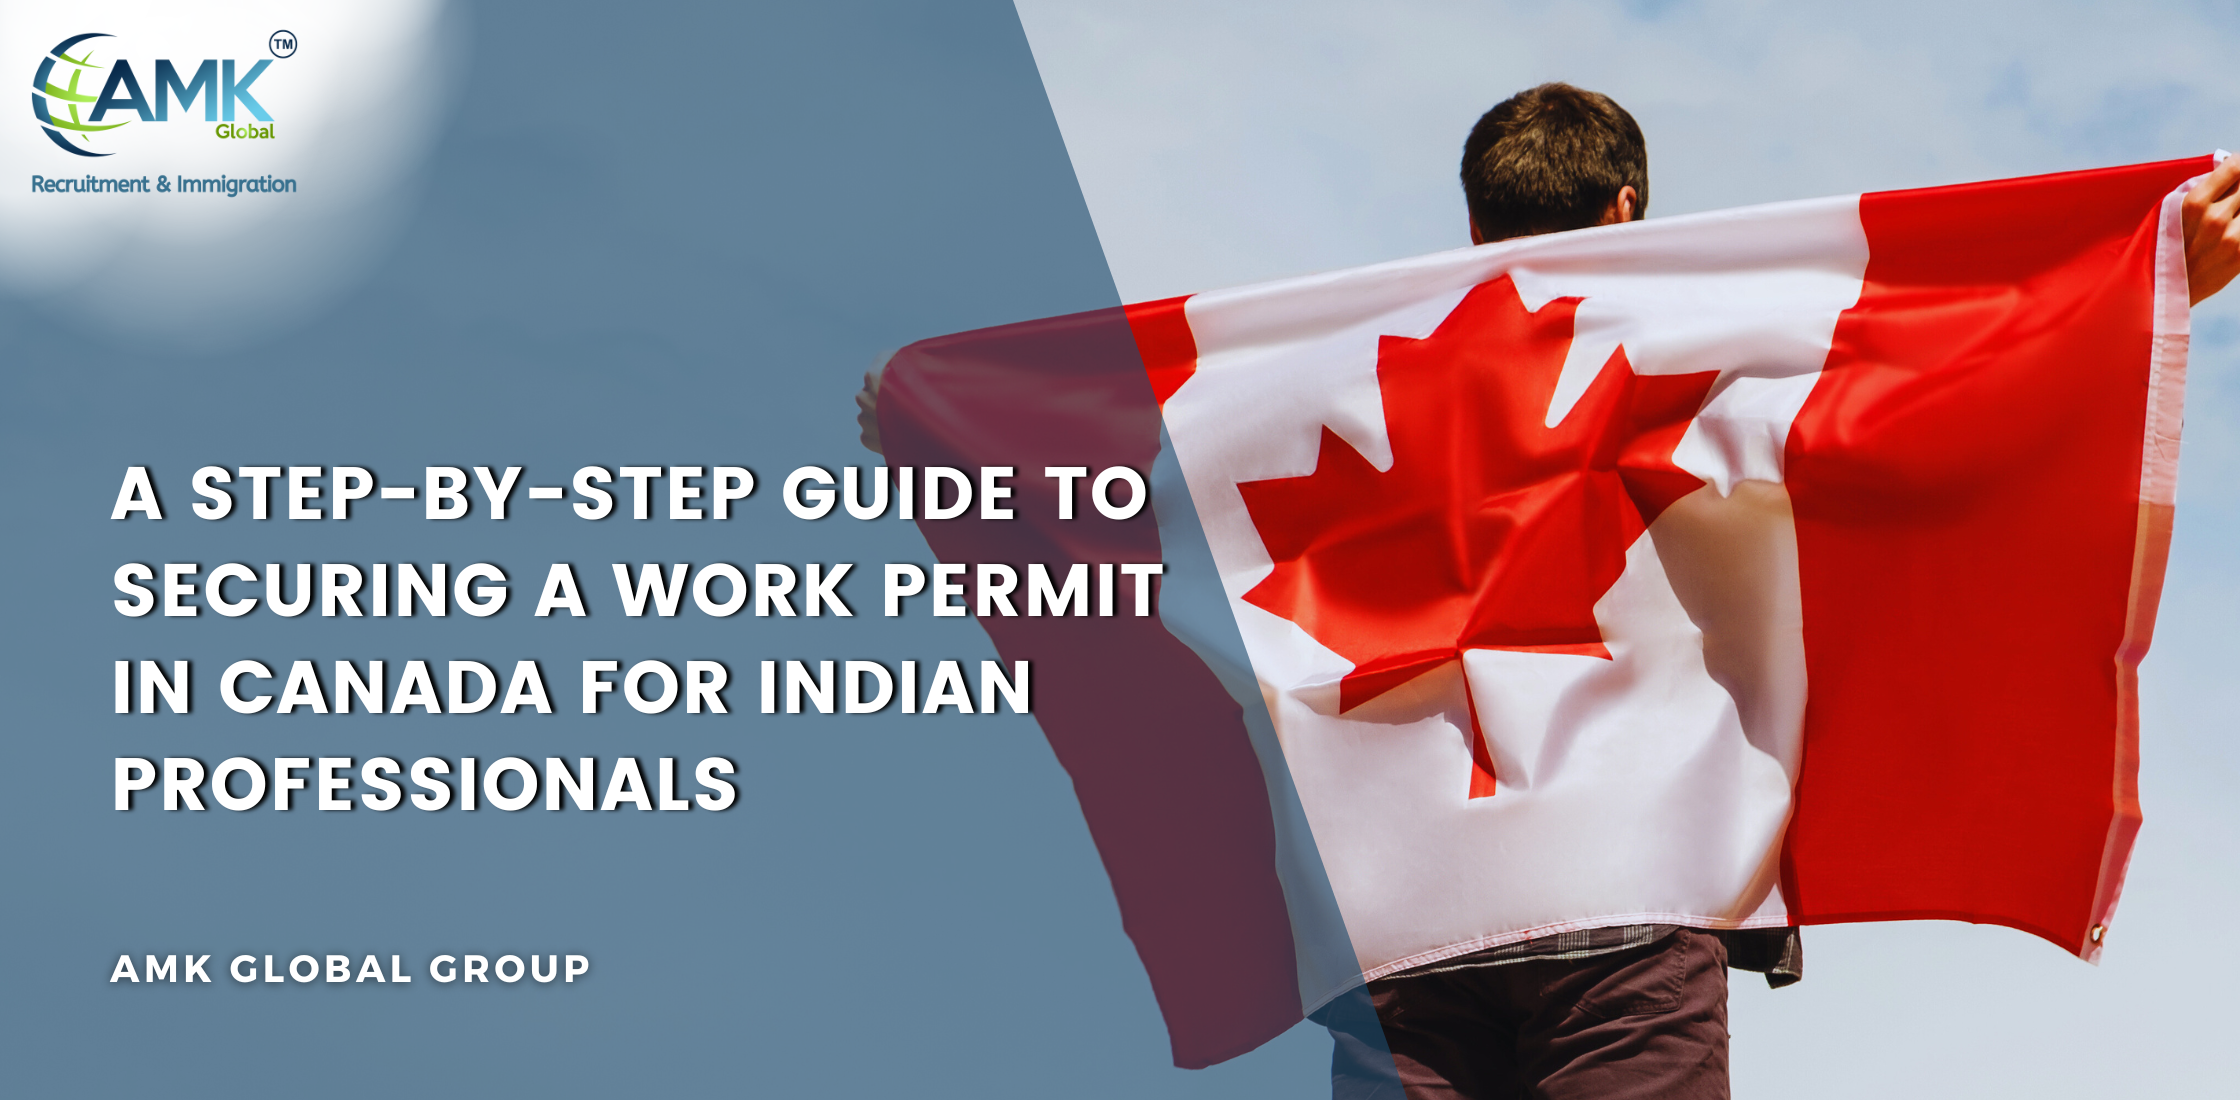 How To Immigrate To Canada As A Carpenter - Canada Immigration and Visa  Information. Canadian Immigration Services and Free Online Evaluation.